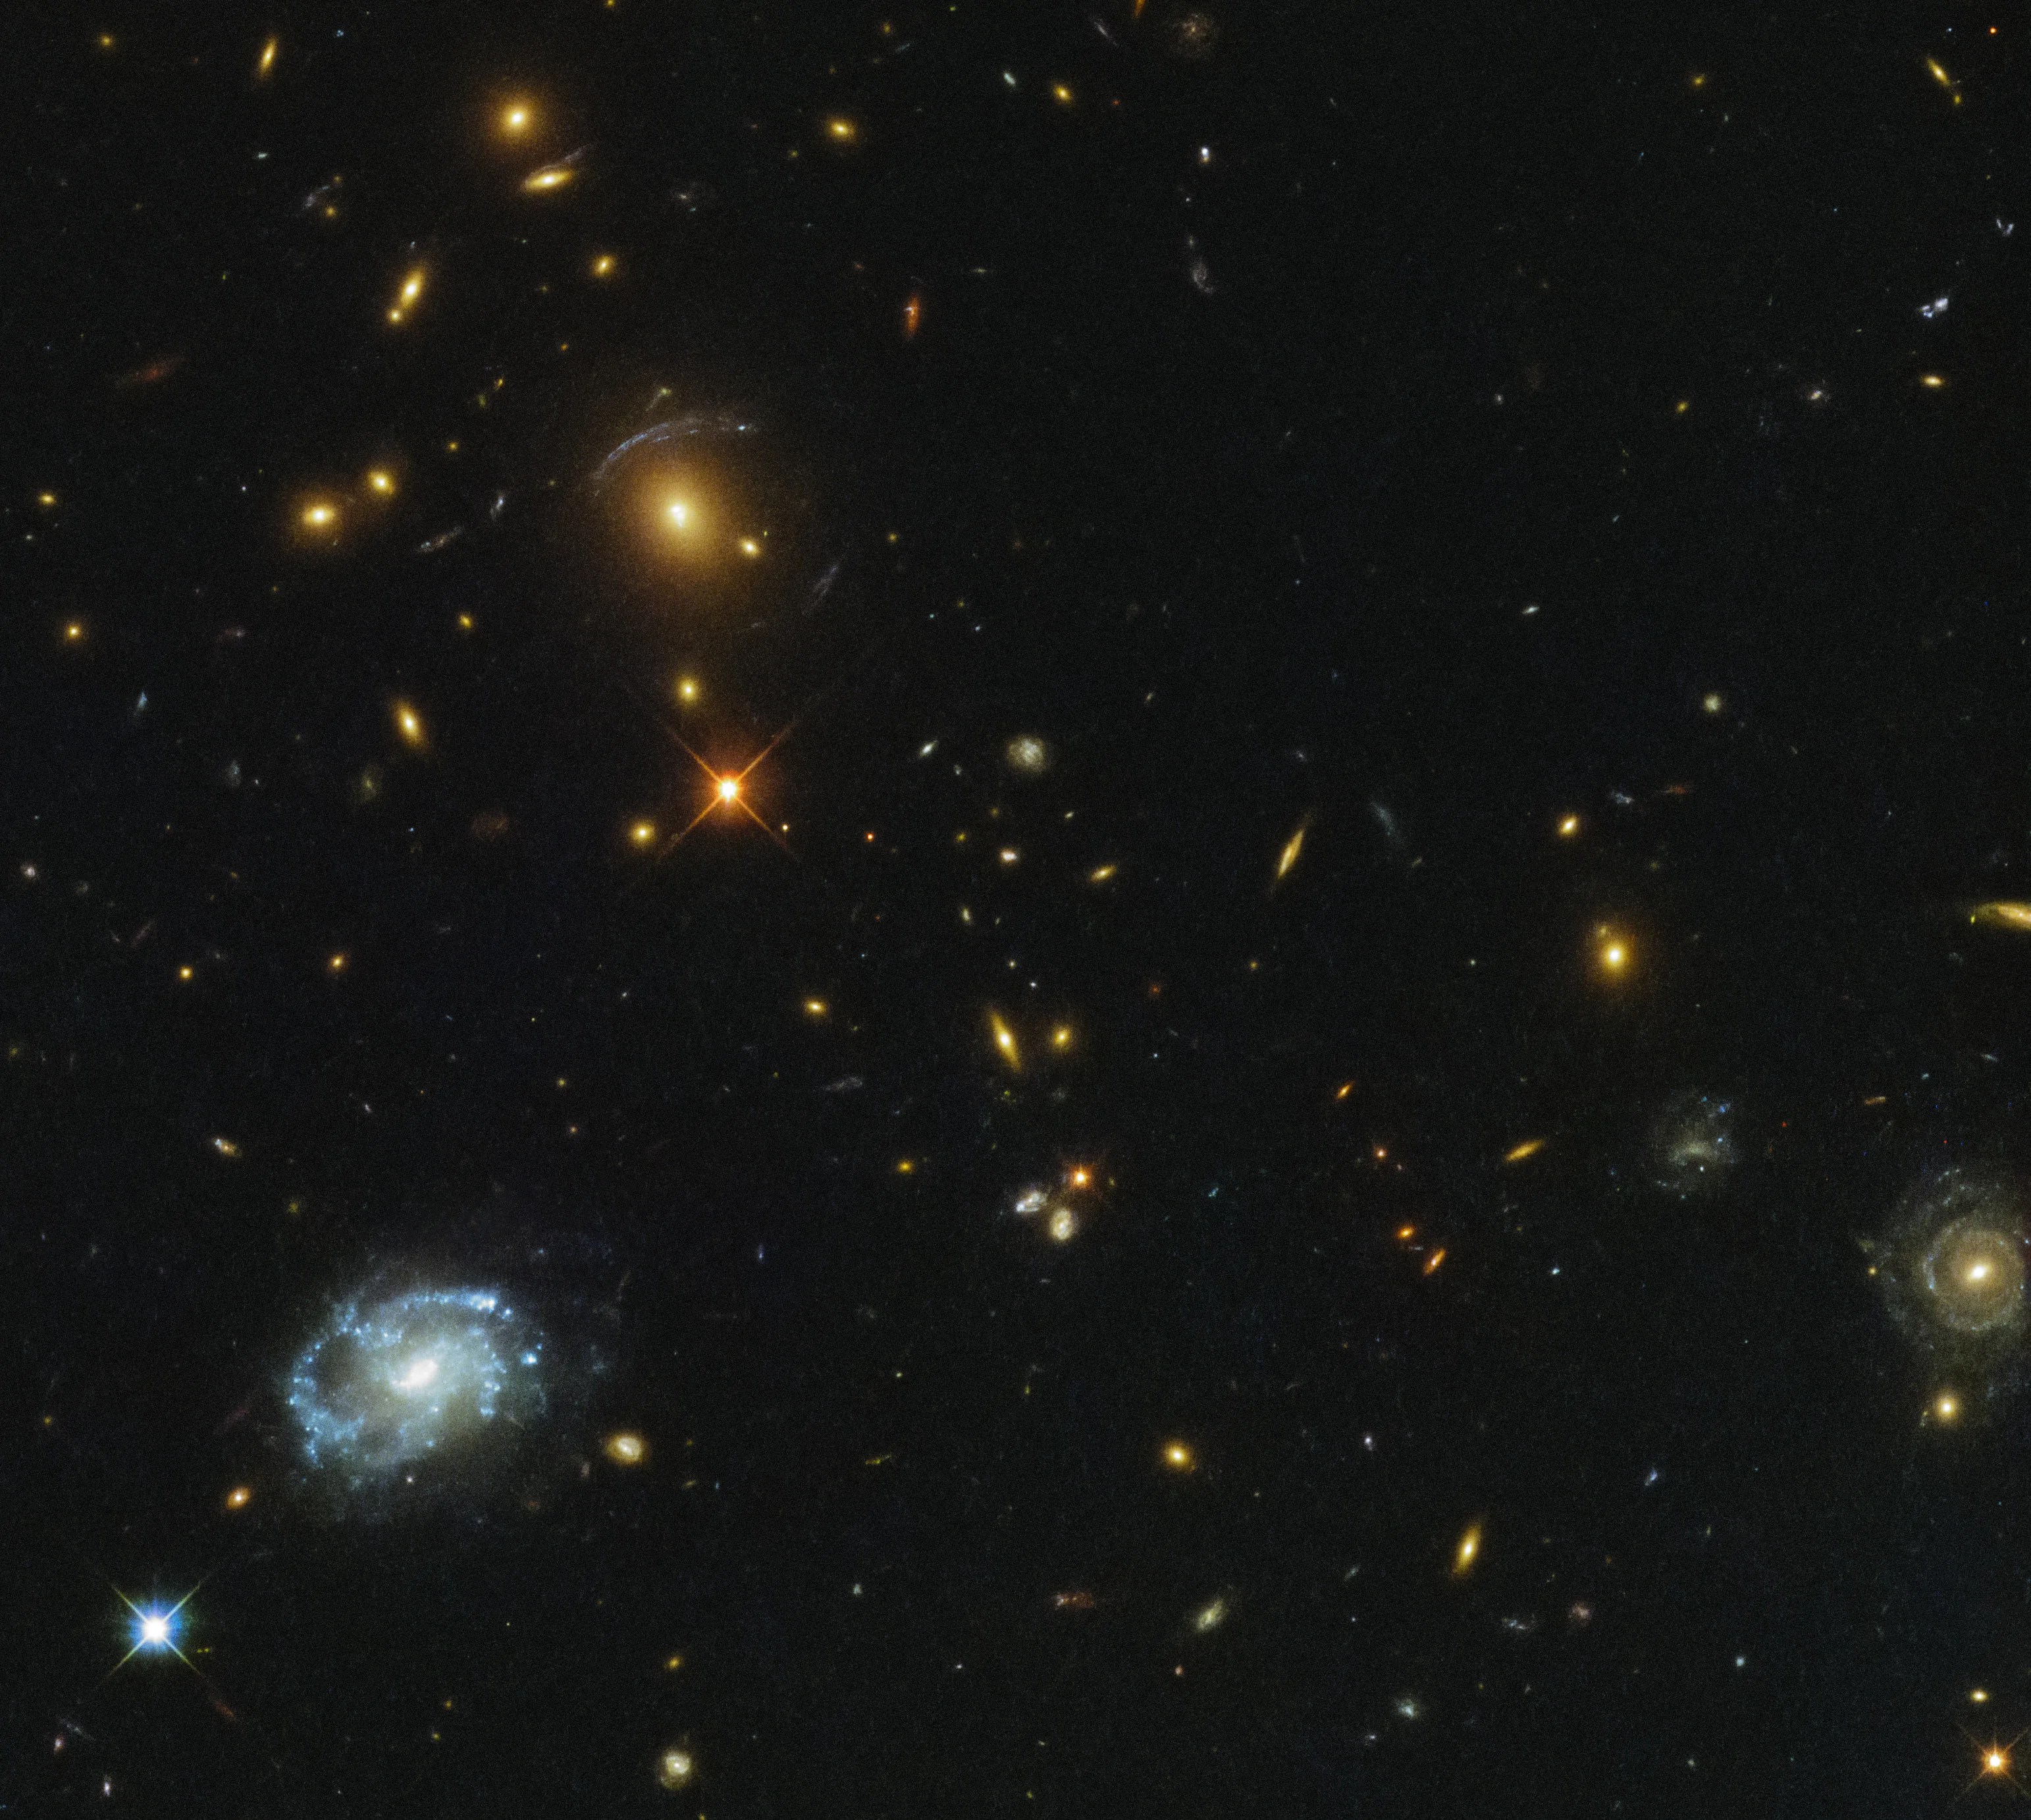 Galaxies and stars sprinkled over a black field